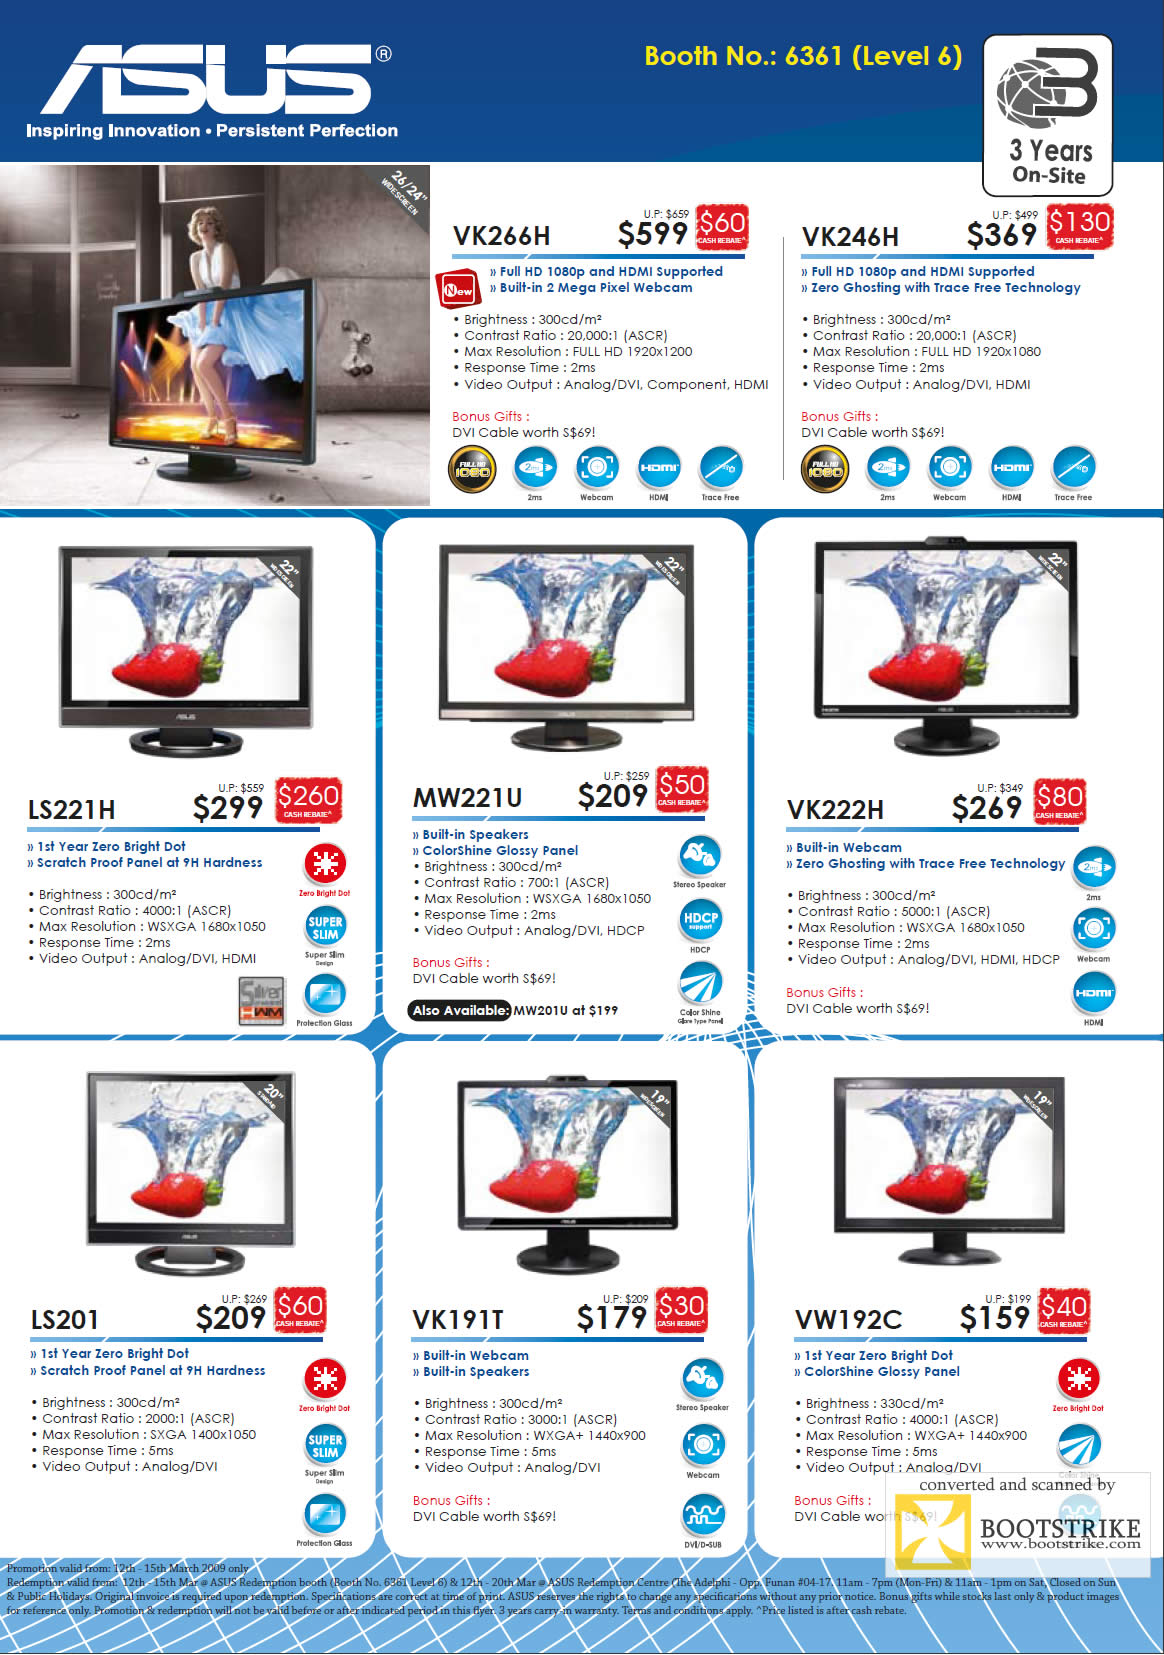 IT Show 2009 price list image brochure of ASUS LCD Monitors